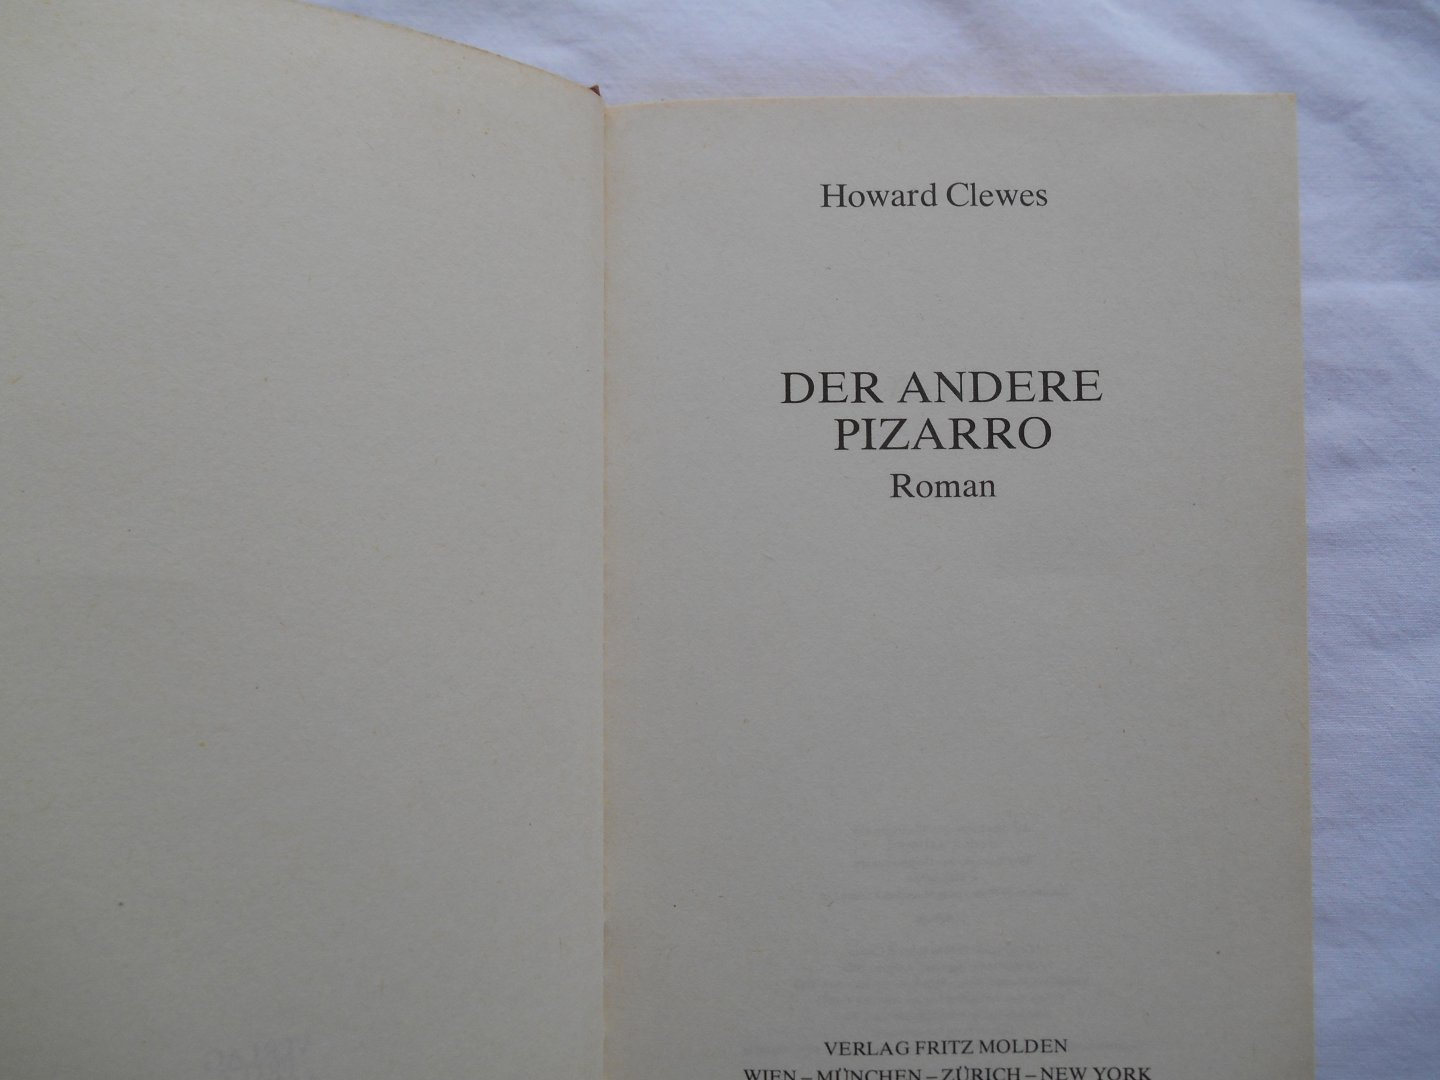 Clewes, Howard - Der andere Pizzarro